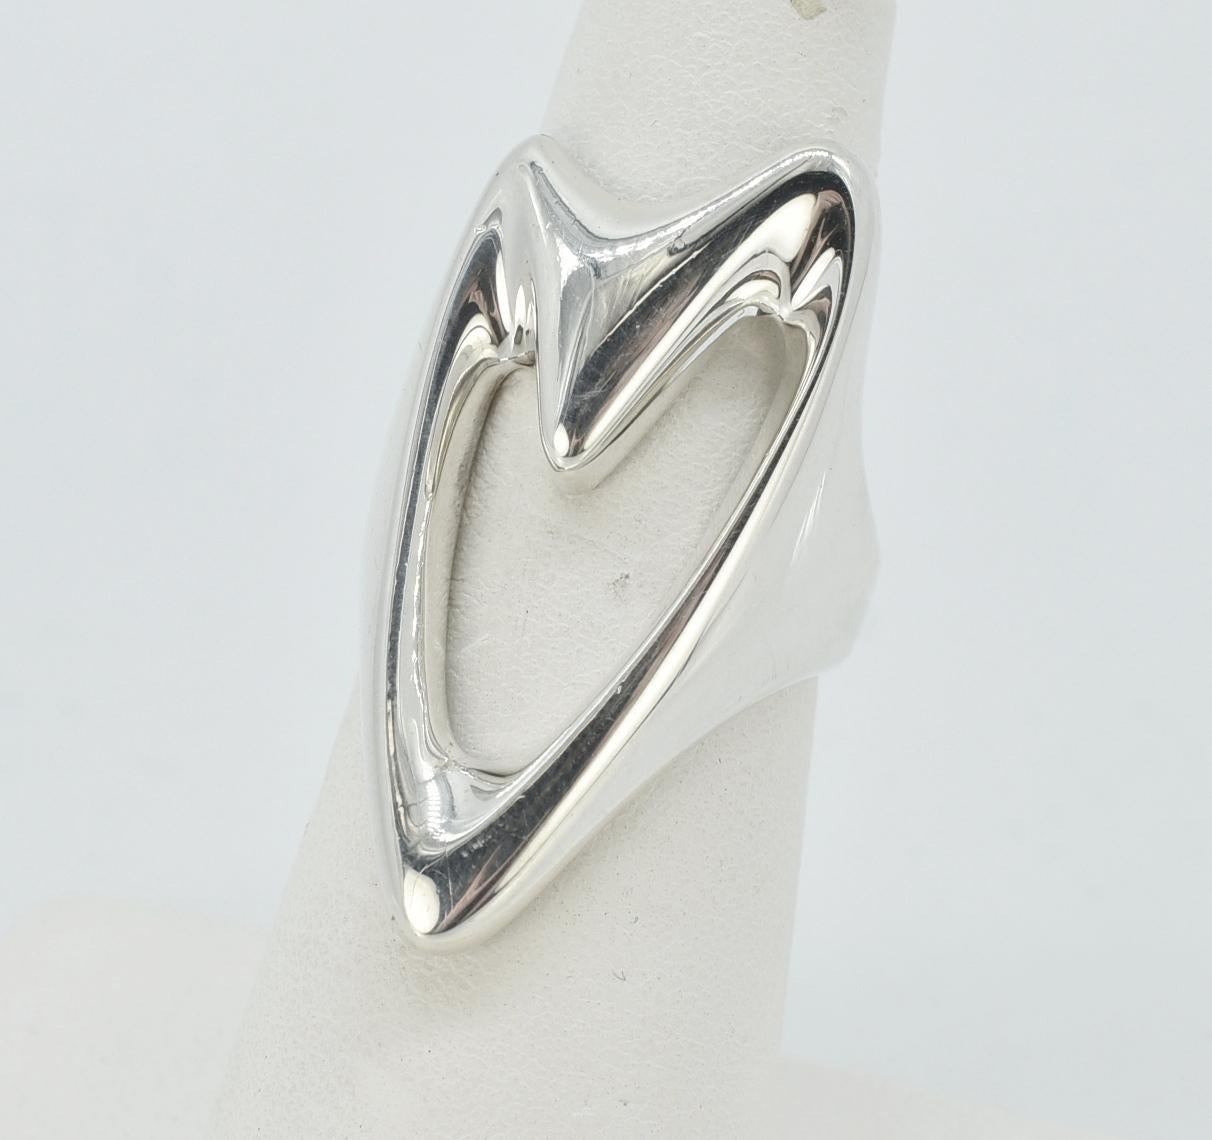 Sterling heart ring by Georg Jensen and Henning Koppel, size 5, style #89. 10.6 grams, 1 1/4